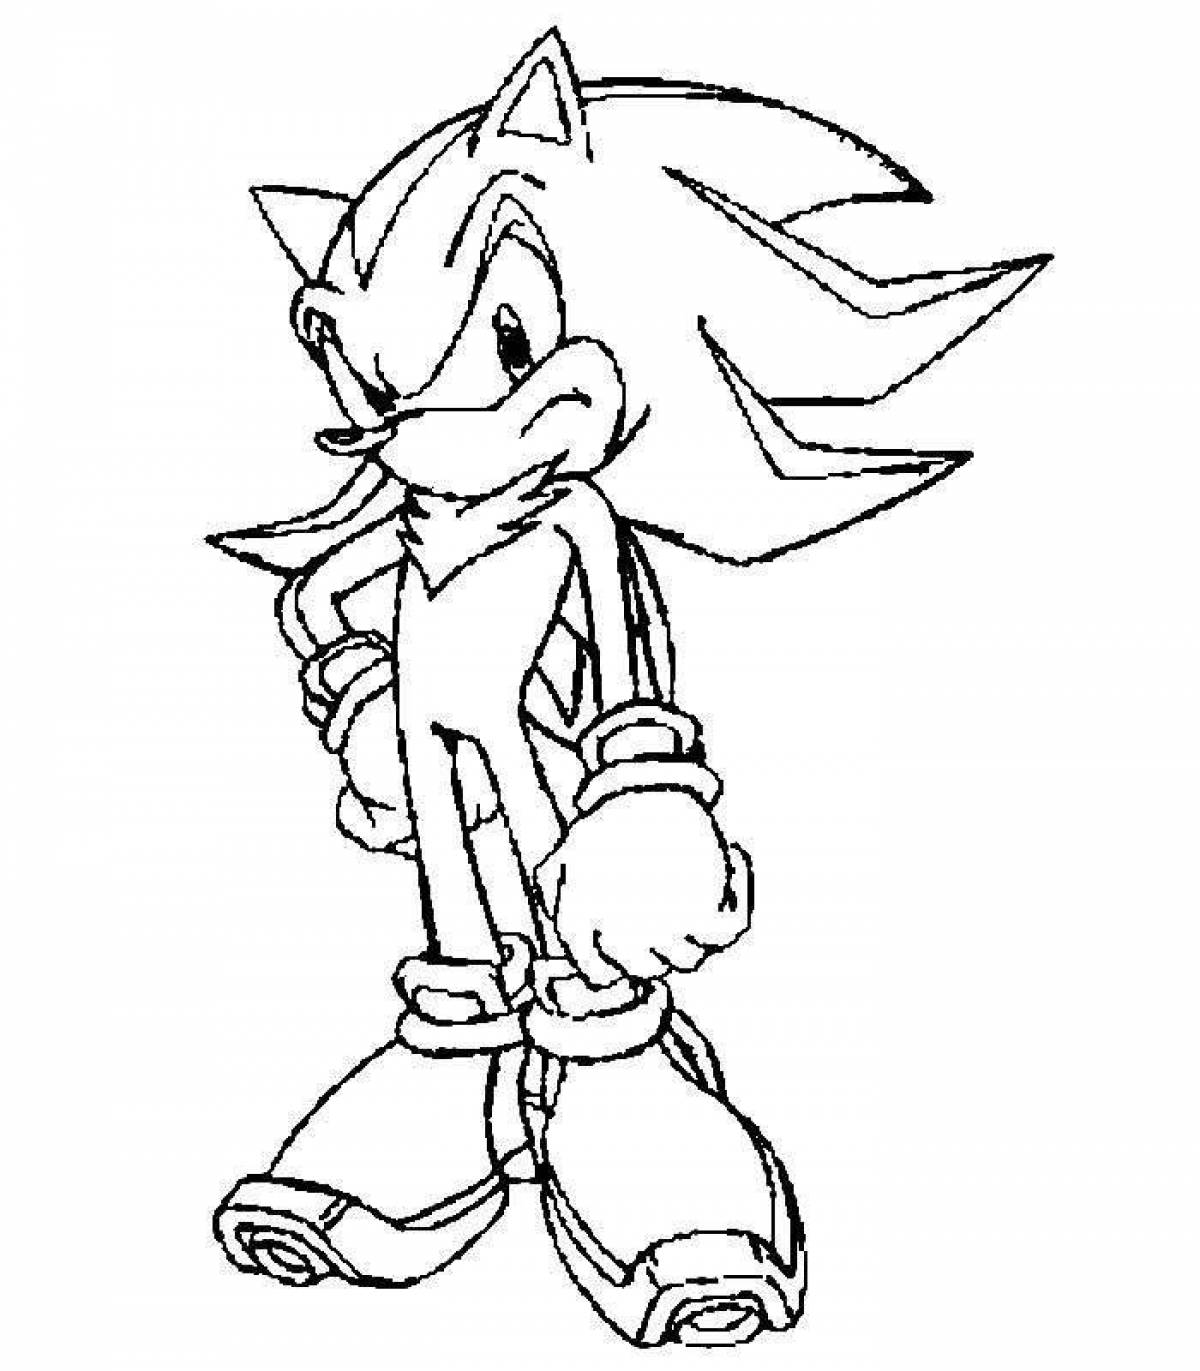 Tempting sonic shadow coloring book